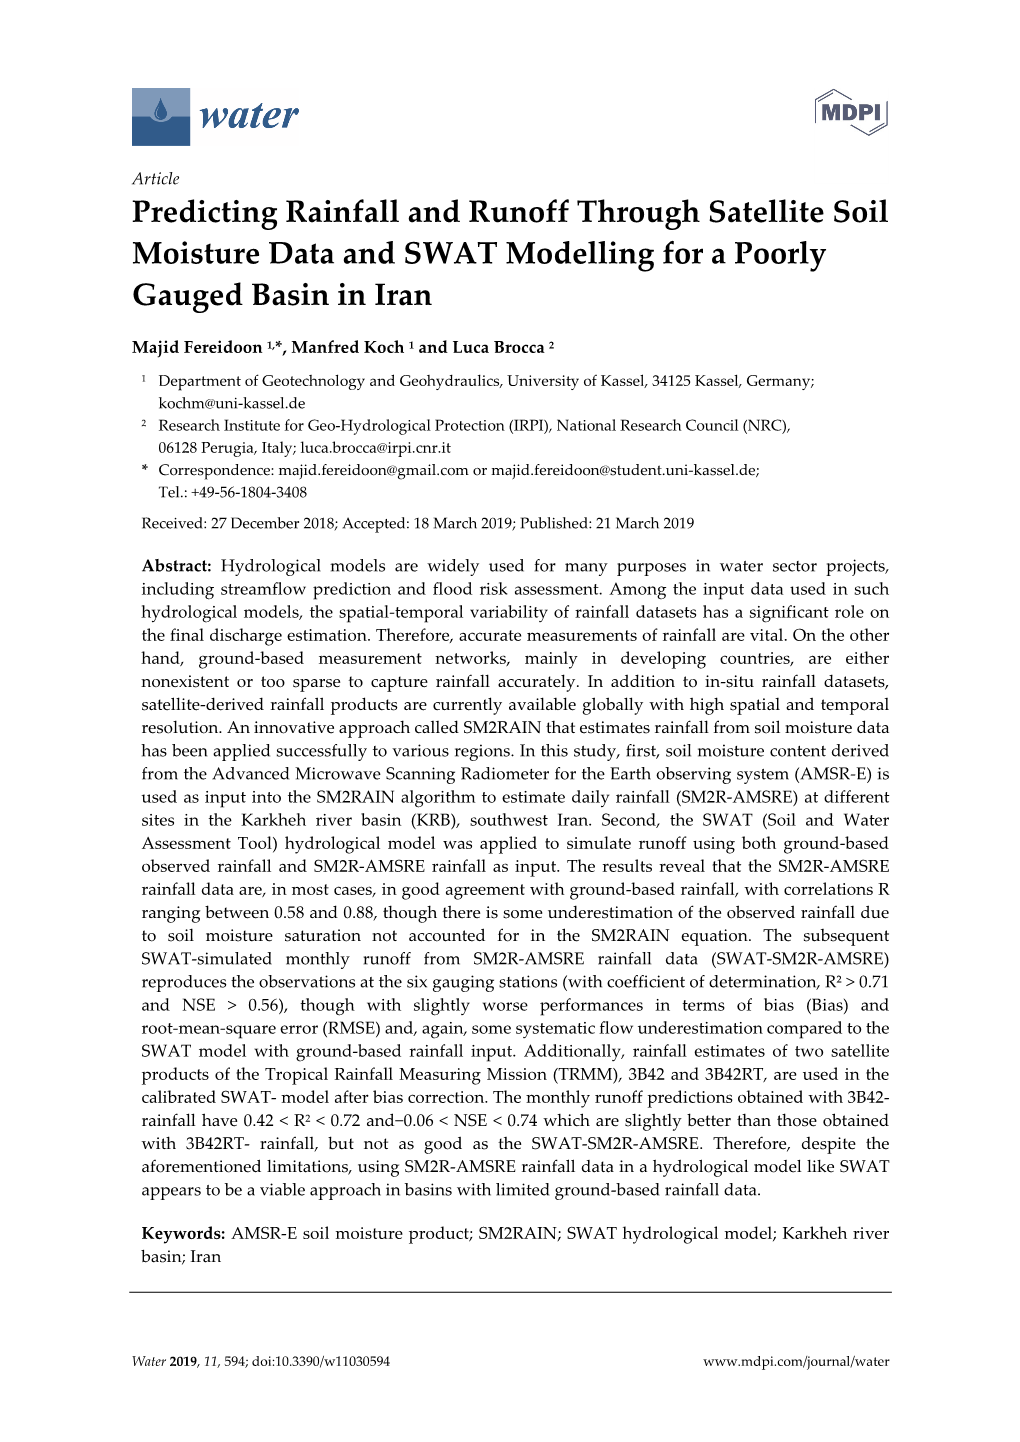 Predicting Rainfall and Runoff Through Satellite Soil Moisture Data and SWAT Modelling for a Poorly Gauged Basin in Iran